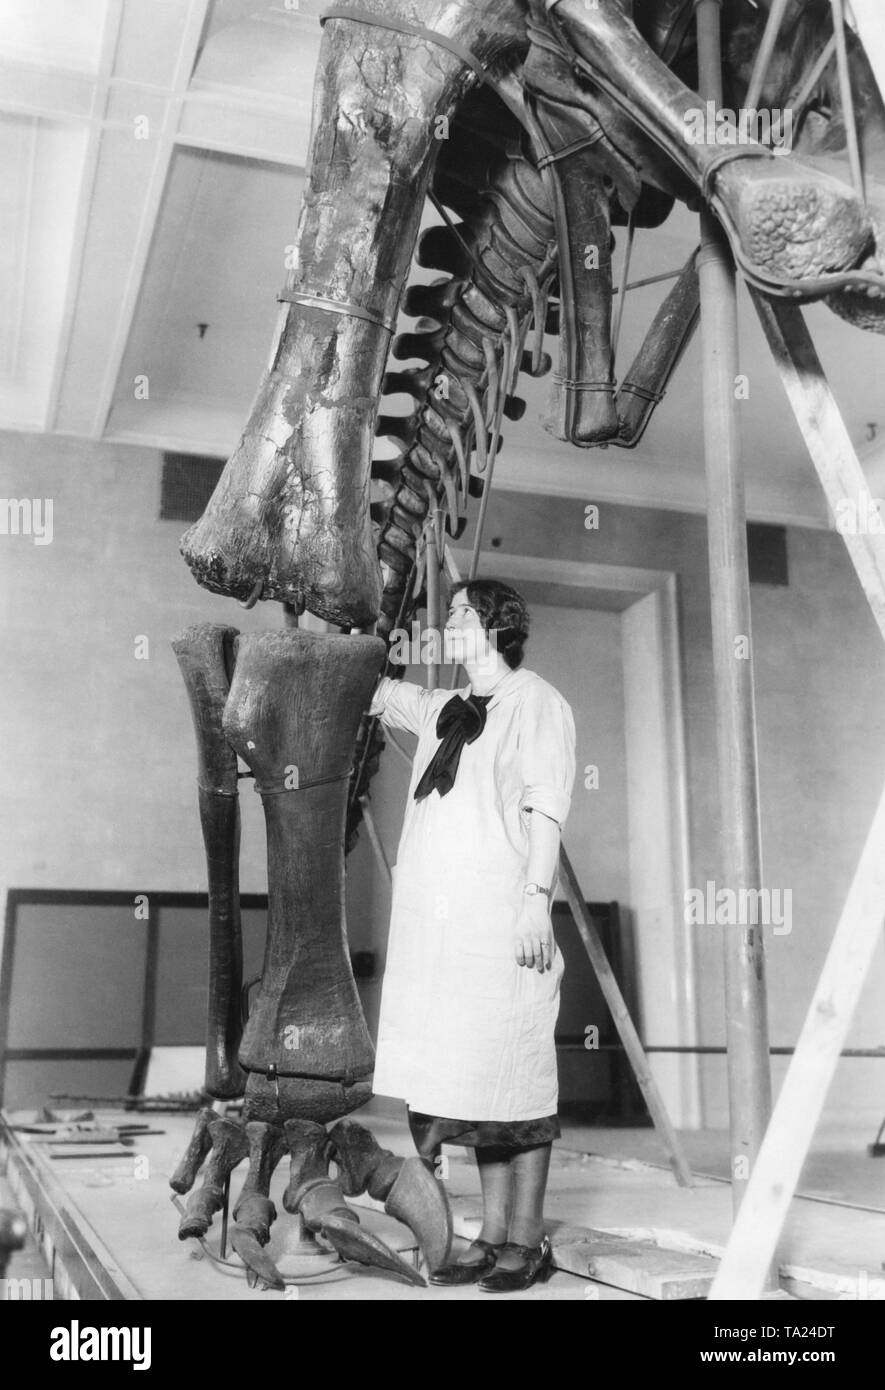 During the spring cleaning the staff of the American Museum of Natural History need to clean the dinosaur skeletons as well. Museum worker Miss Walker cleans the skeleton of a brontosaur. The discovery site of this skeleton was Wyoming. Stock Photo